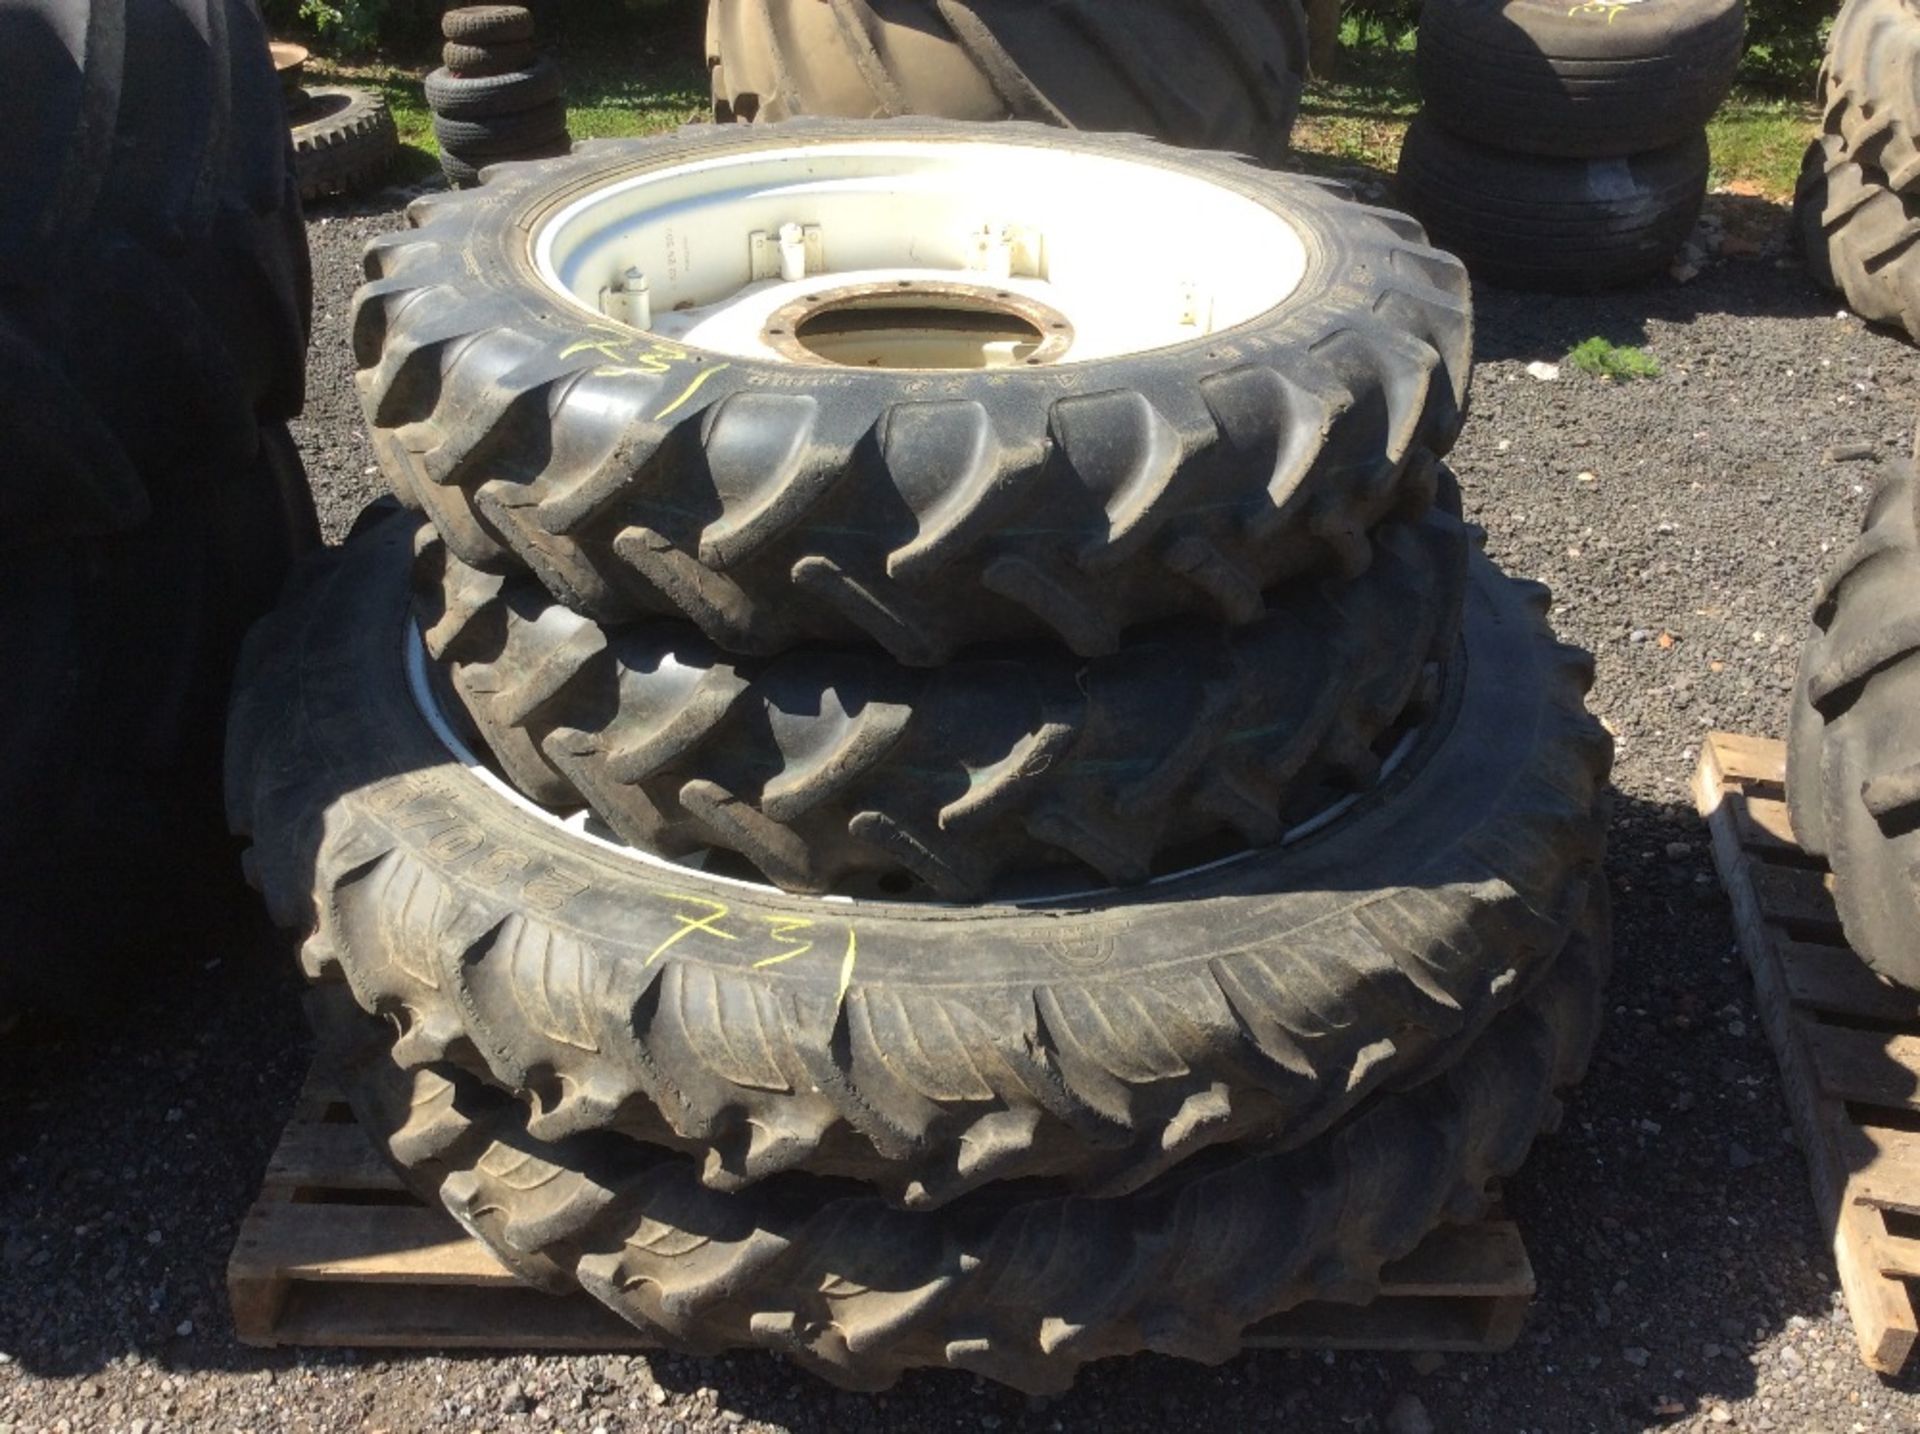 Set of row crop wheels and tyres to fit New Holland. 230/925 R48 rears at 80%. 230/95 R32 fronts